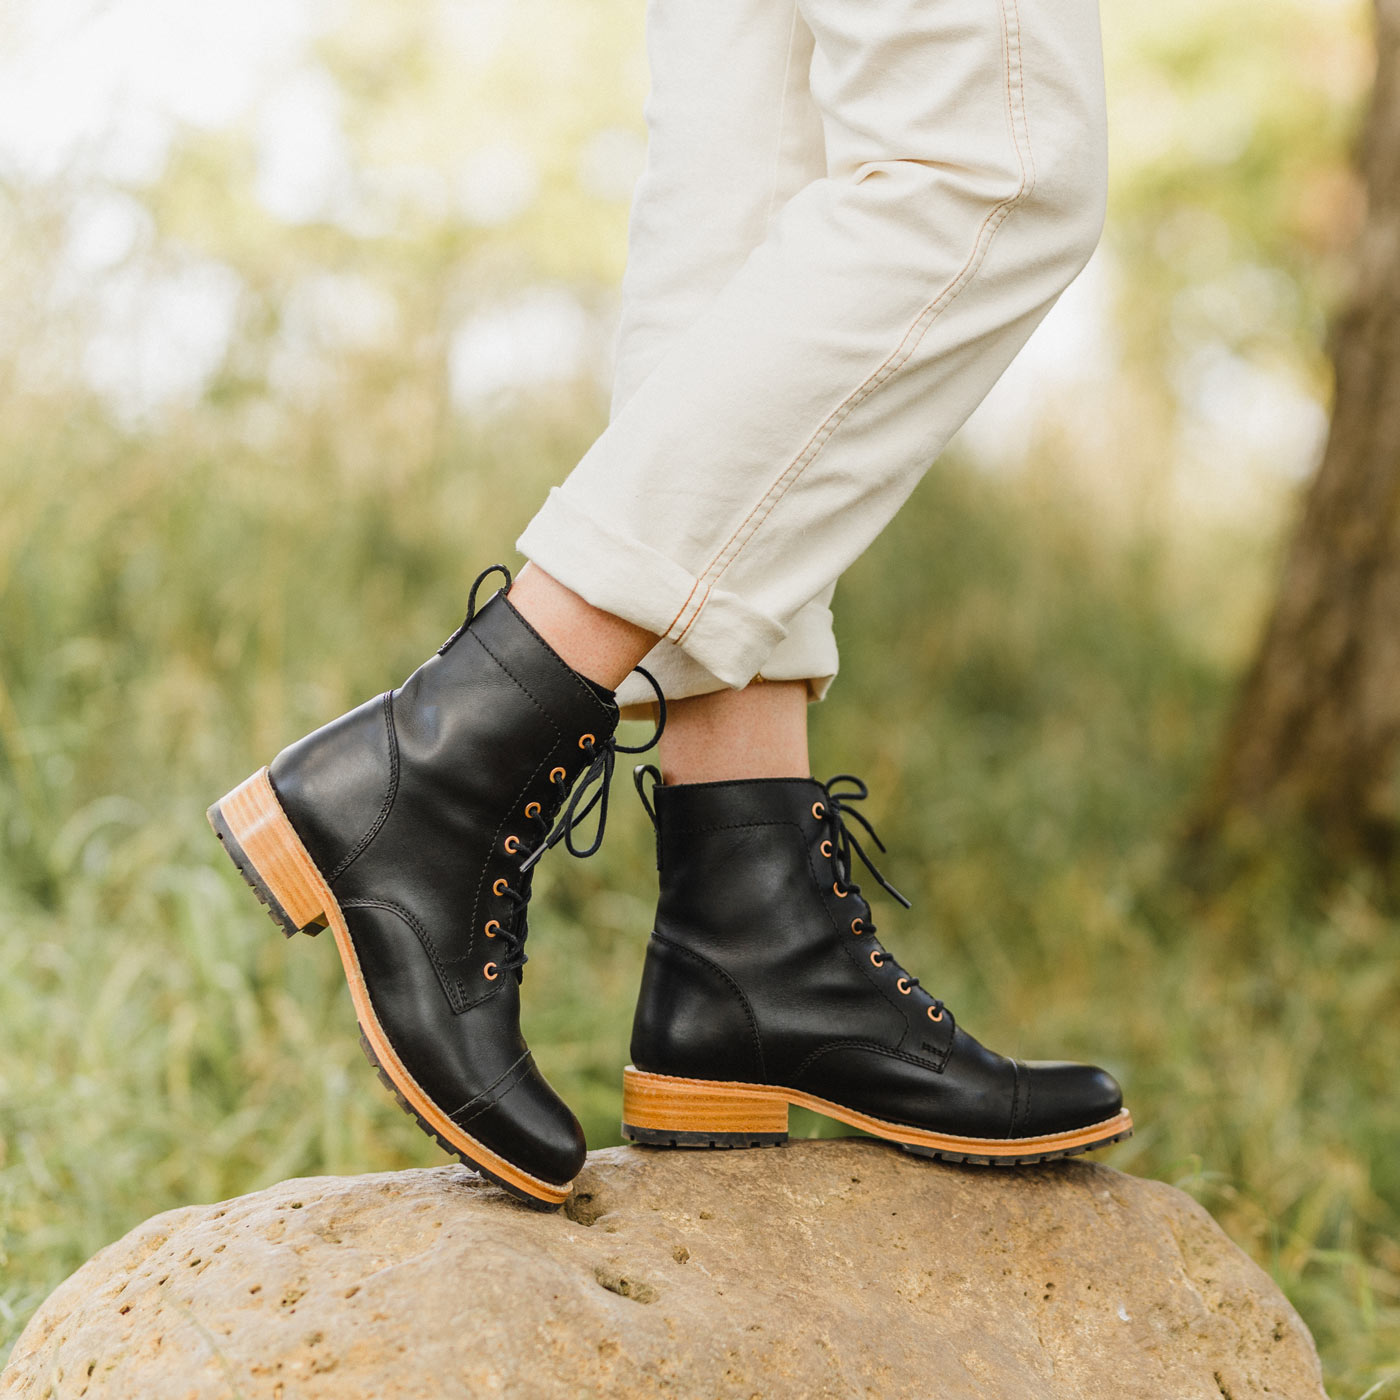 Almost Perfect' Women's Lace-up Boot - $99.00 | Portland Leather Resale  Marketplace